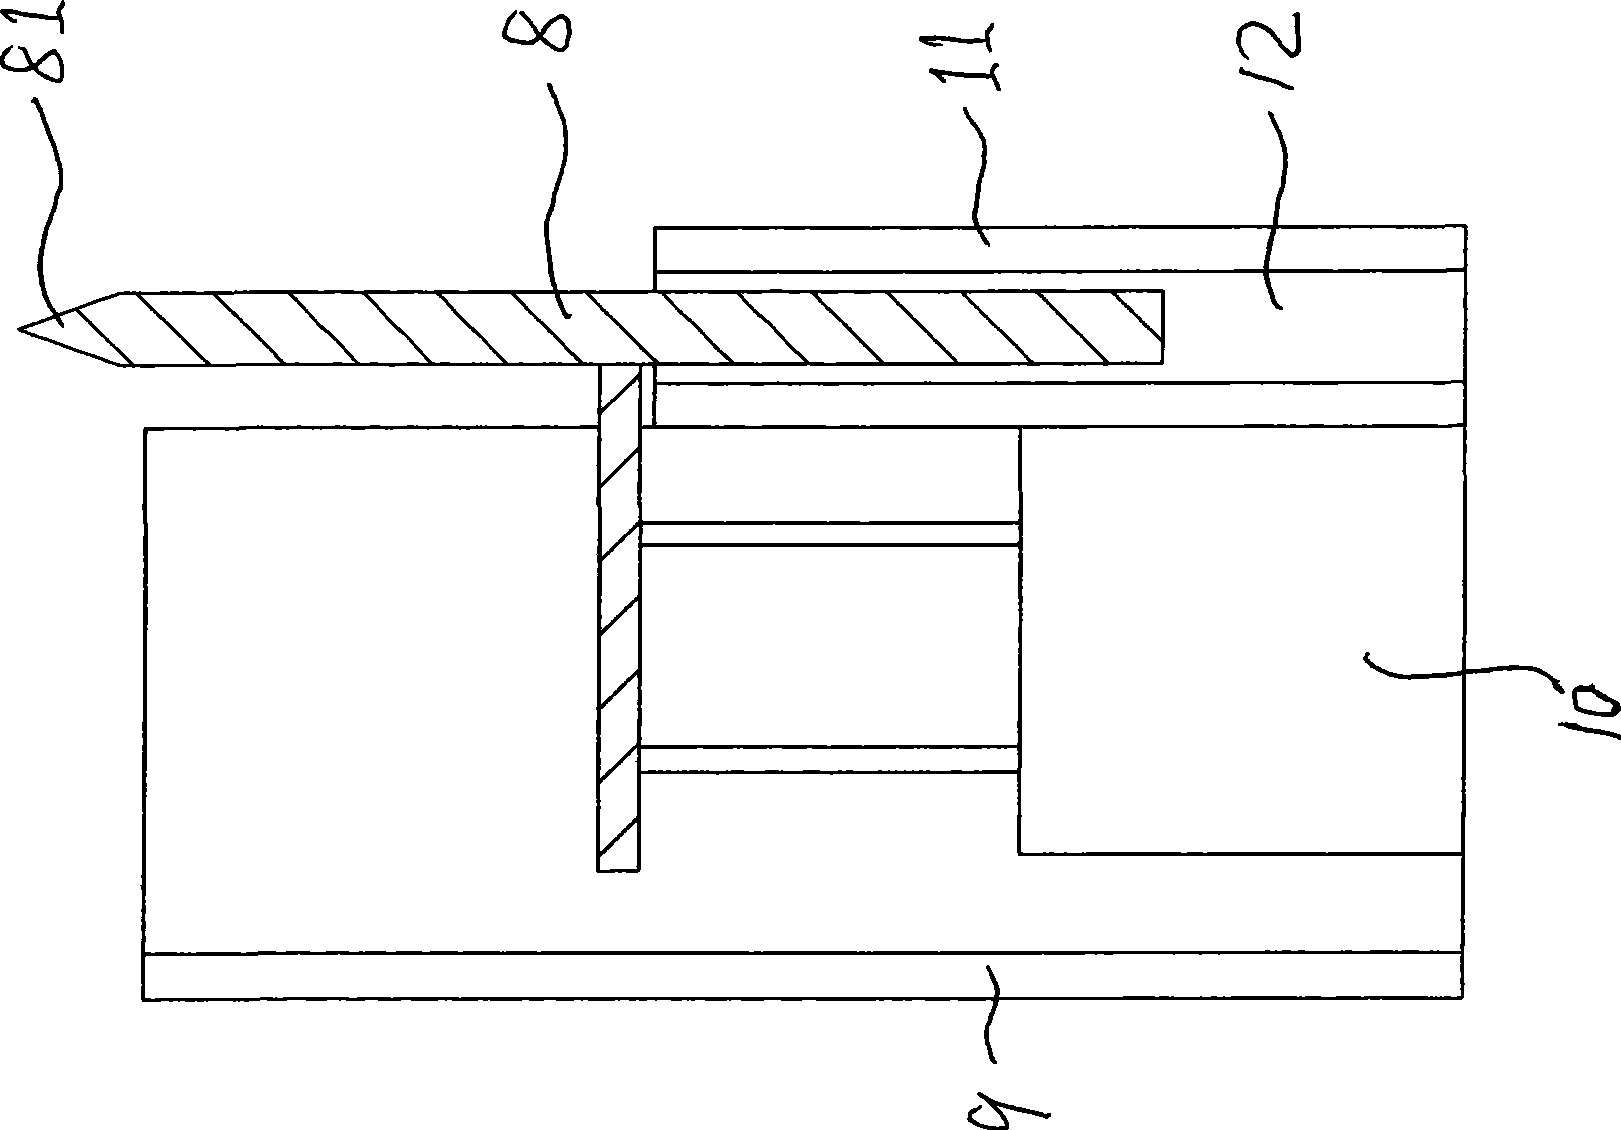 Plot movement device and special cutter maintaining undisturbed soil free from loss, and method for plot movement using device